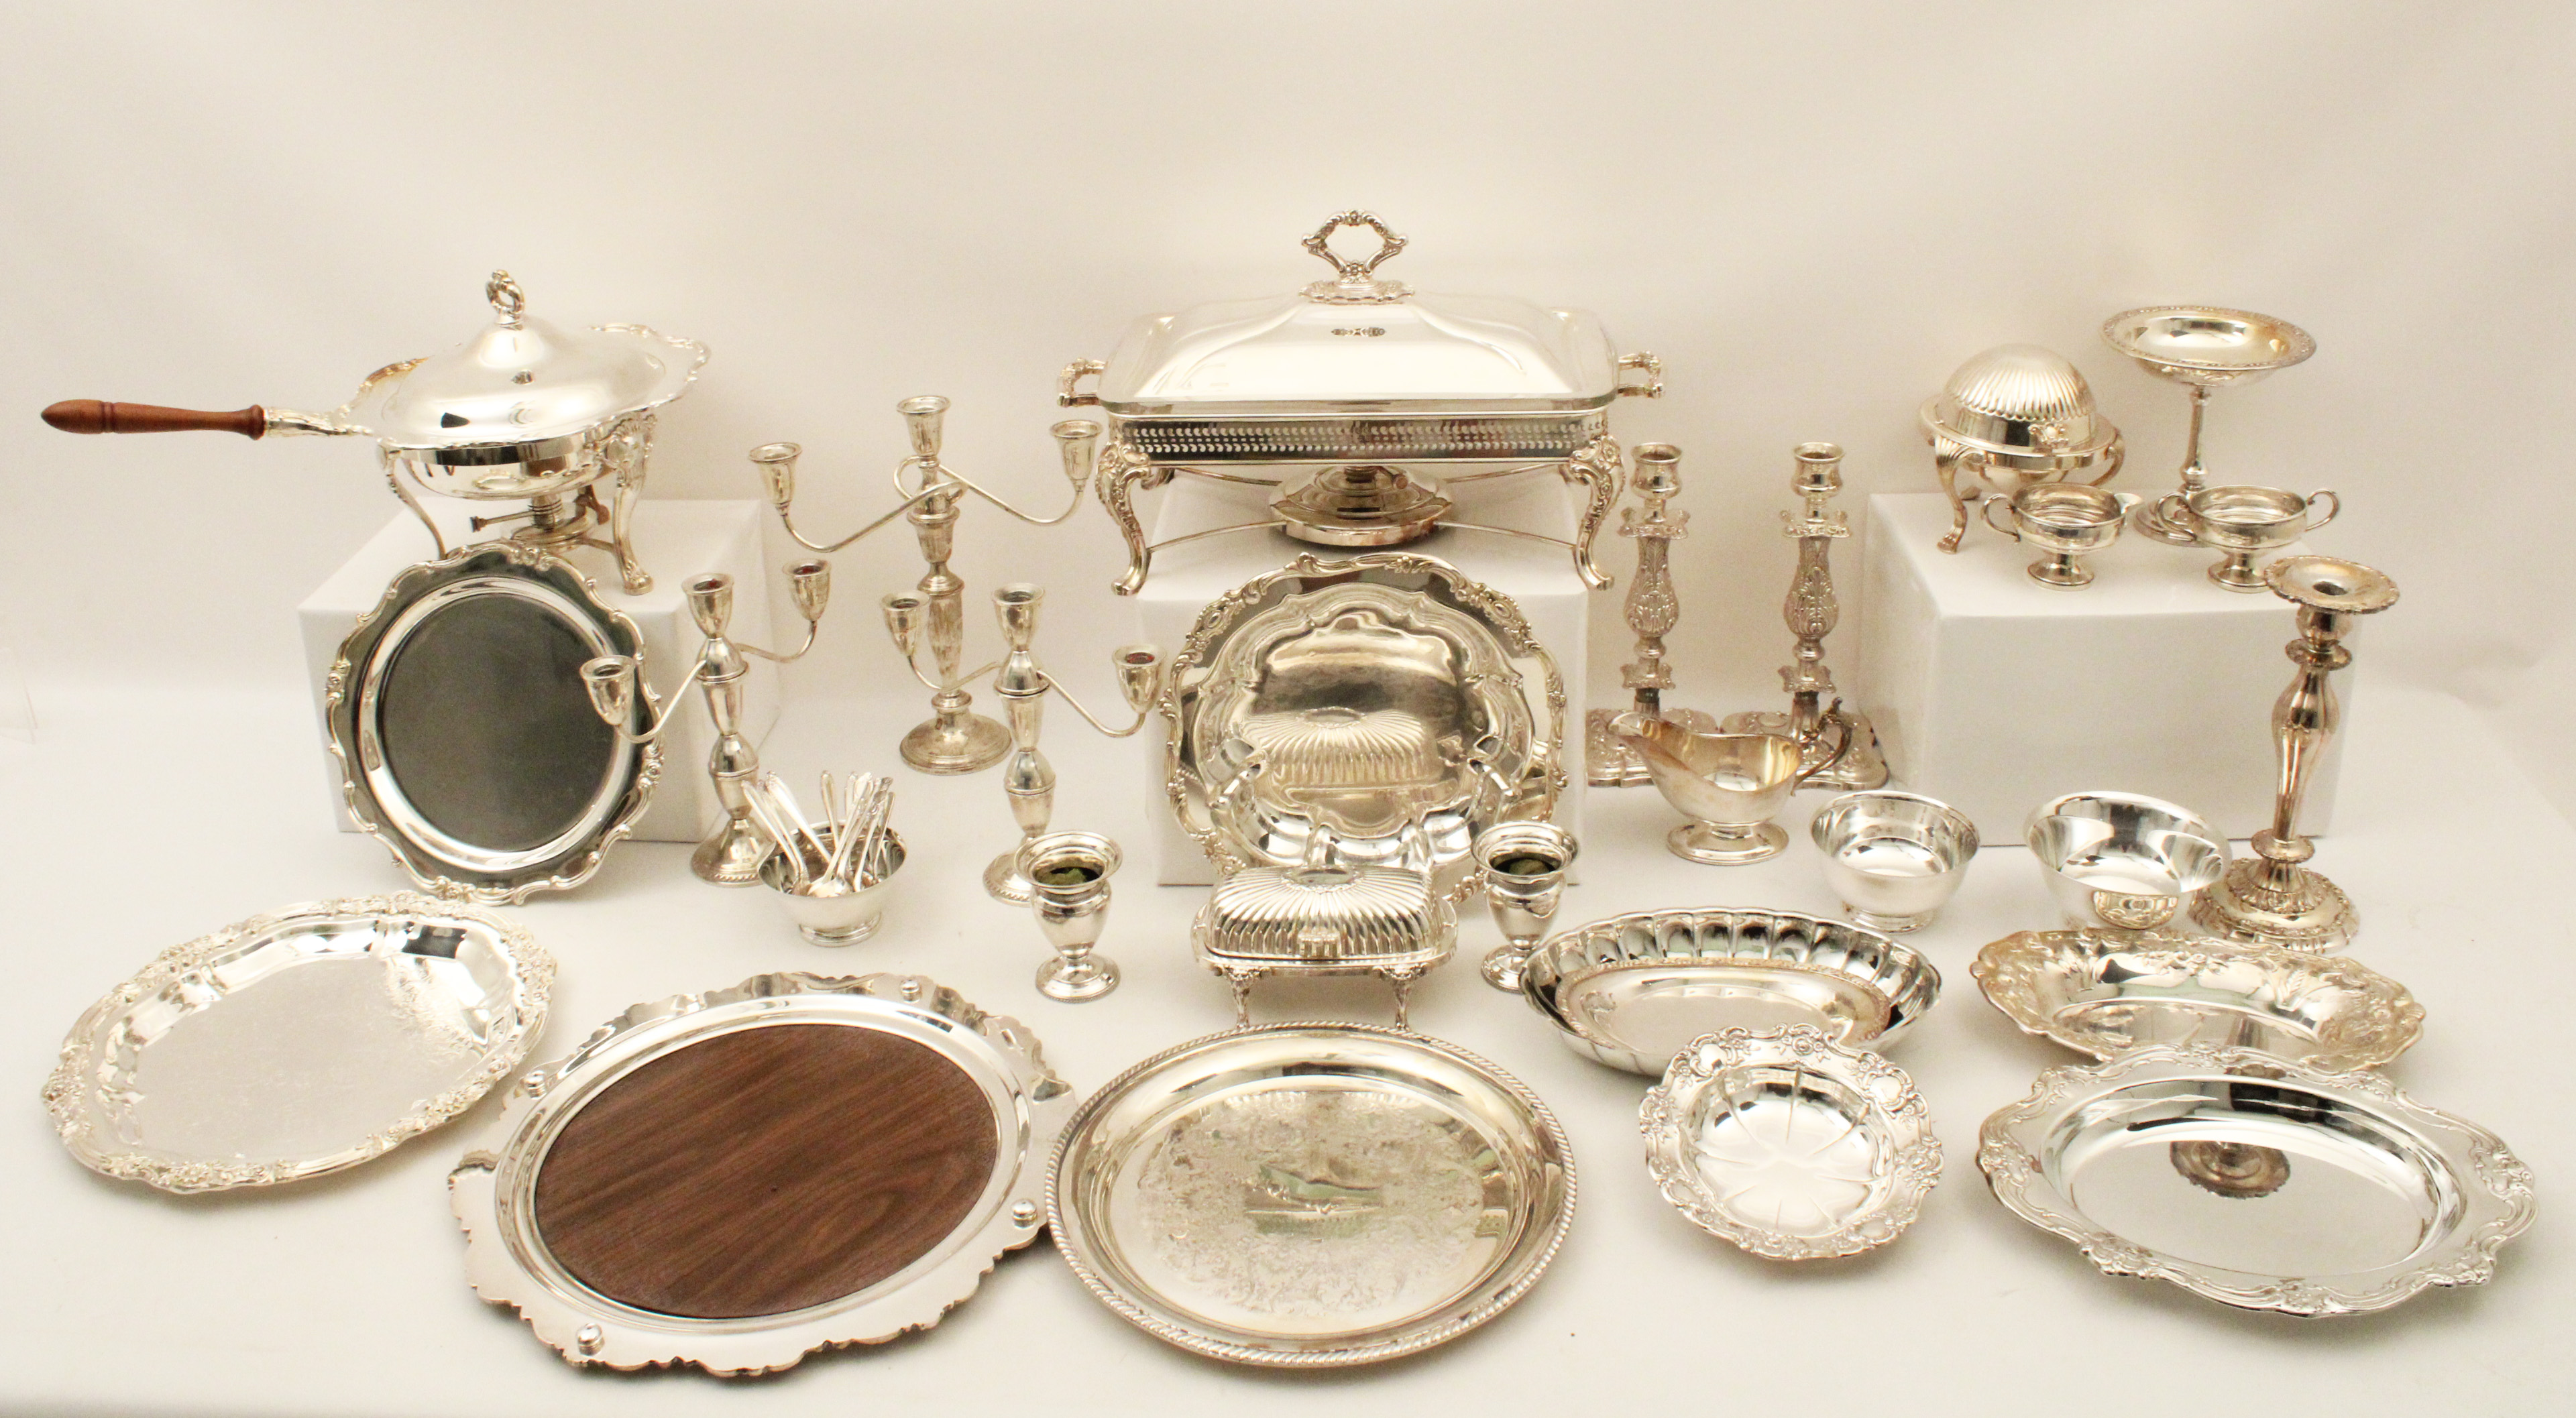 BANQUET LOT OF SILVER PLATE BANQUET 35f4c3